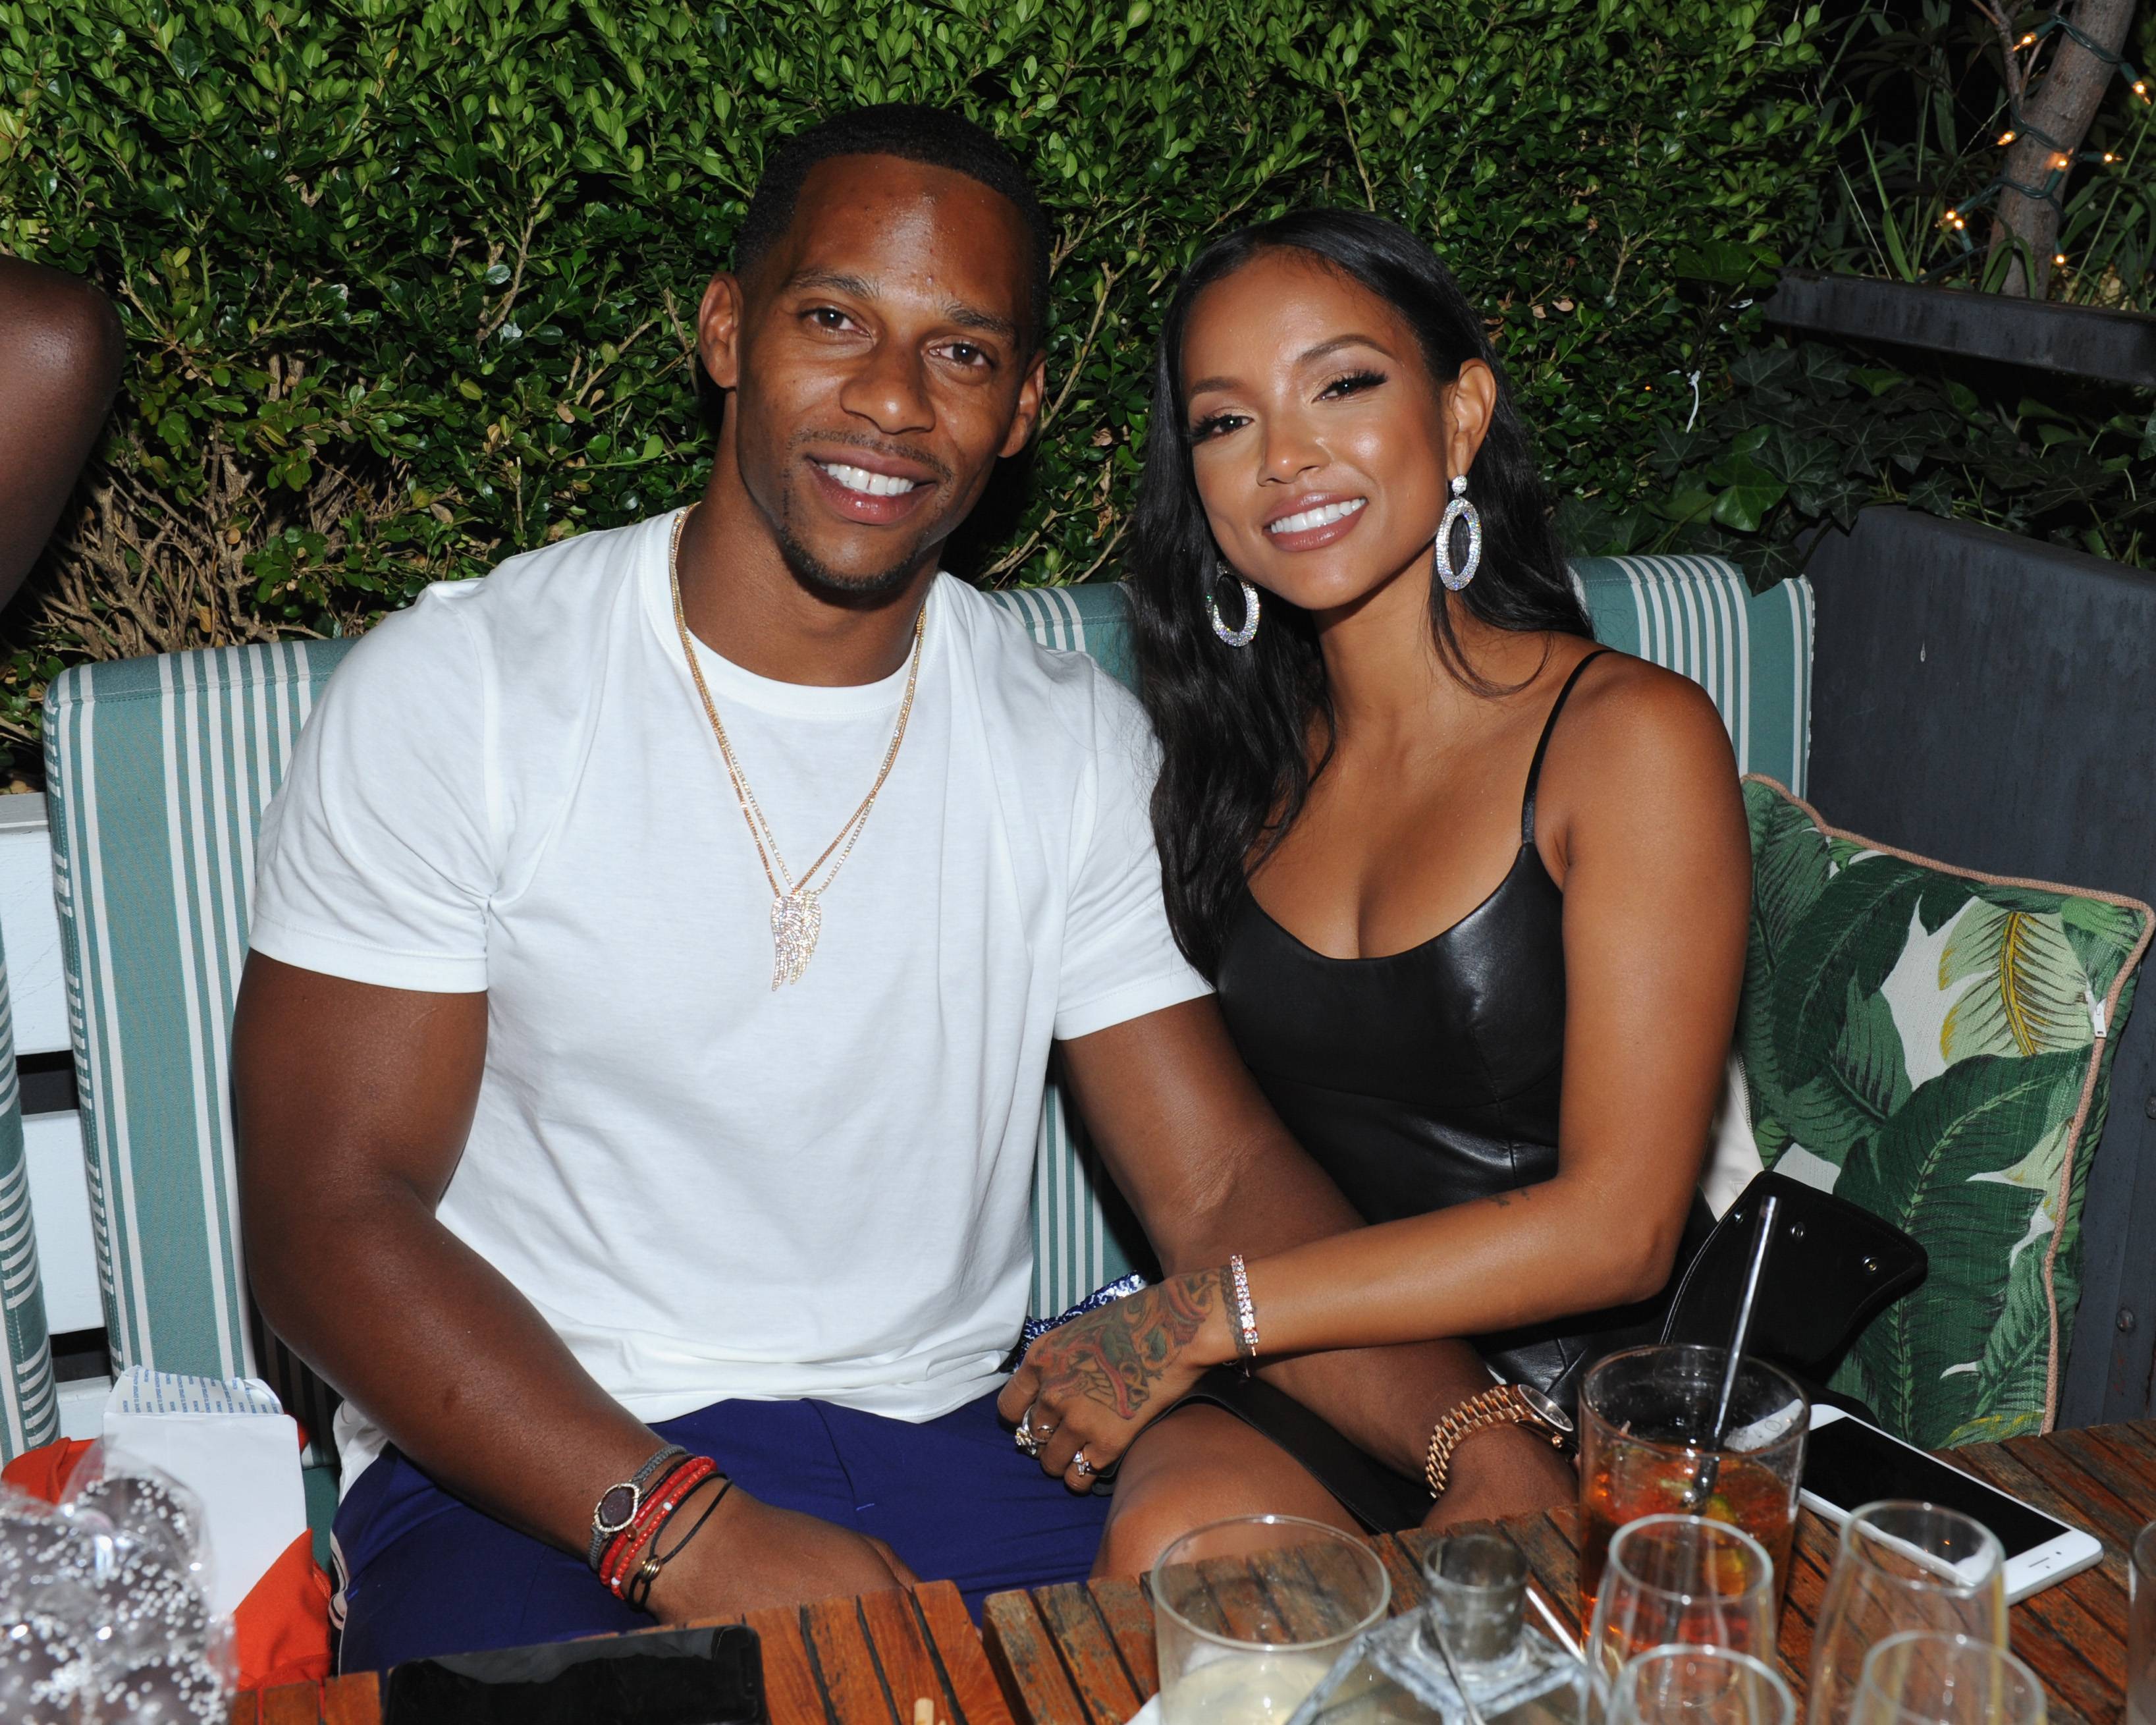 Did you see Karreuche's New Man?